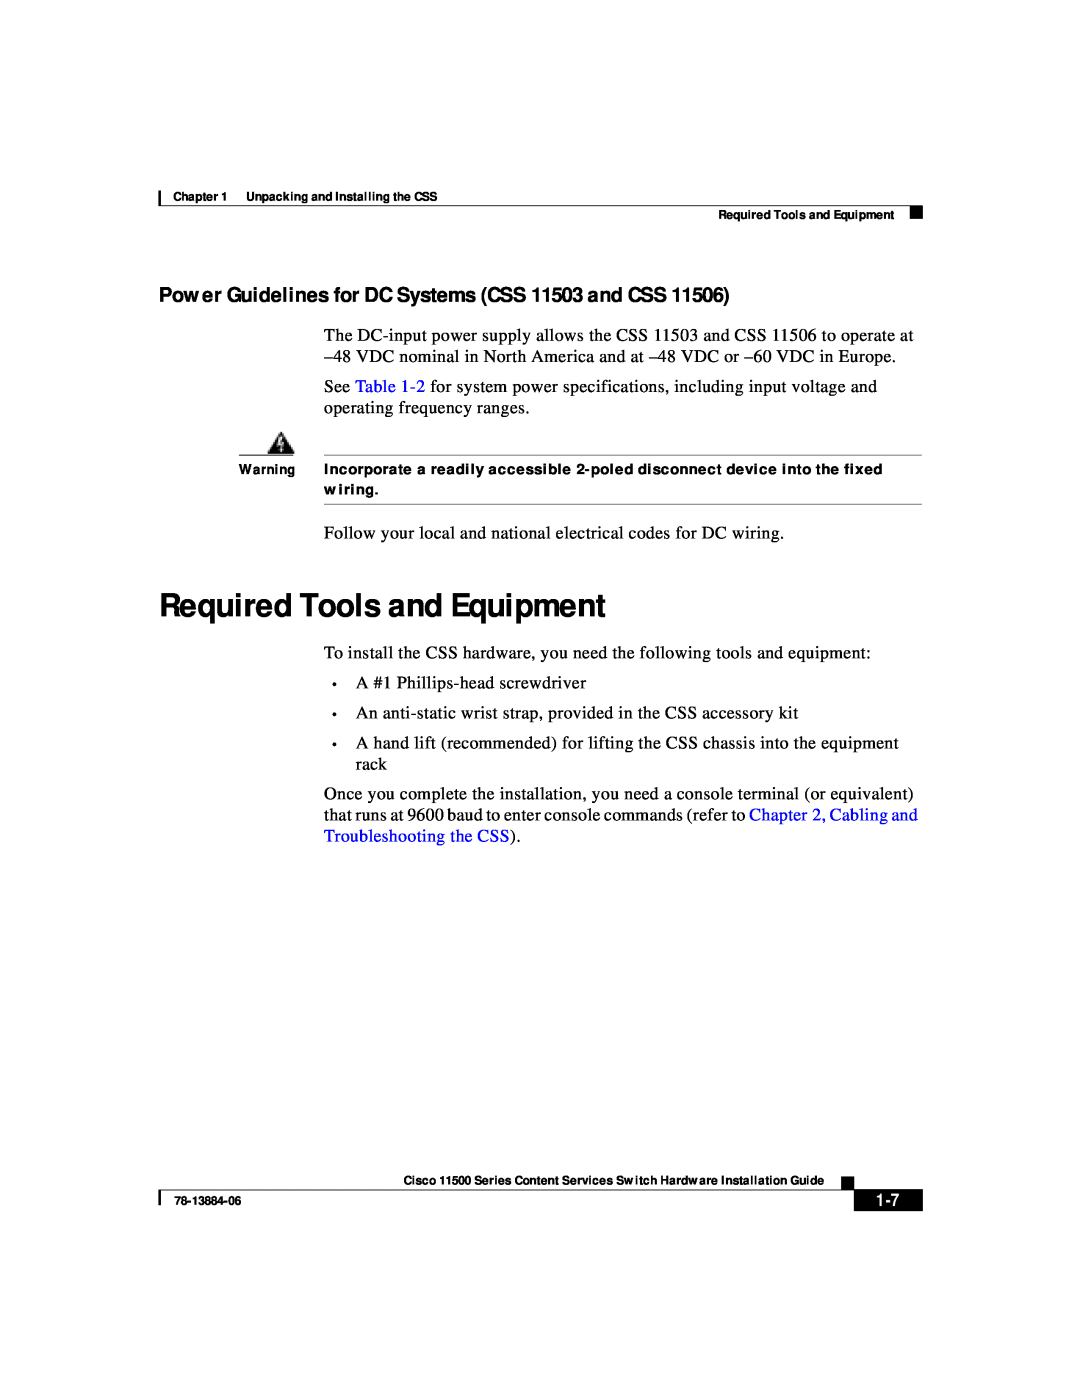 Cisco Systems 11500 Series manual Required Tools and Equipment, Power Guidelines for DC Systems CSS 11503 and CSS 